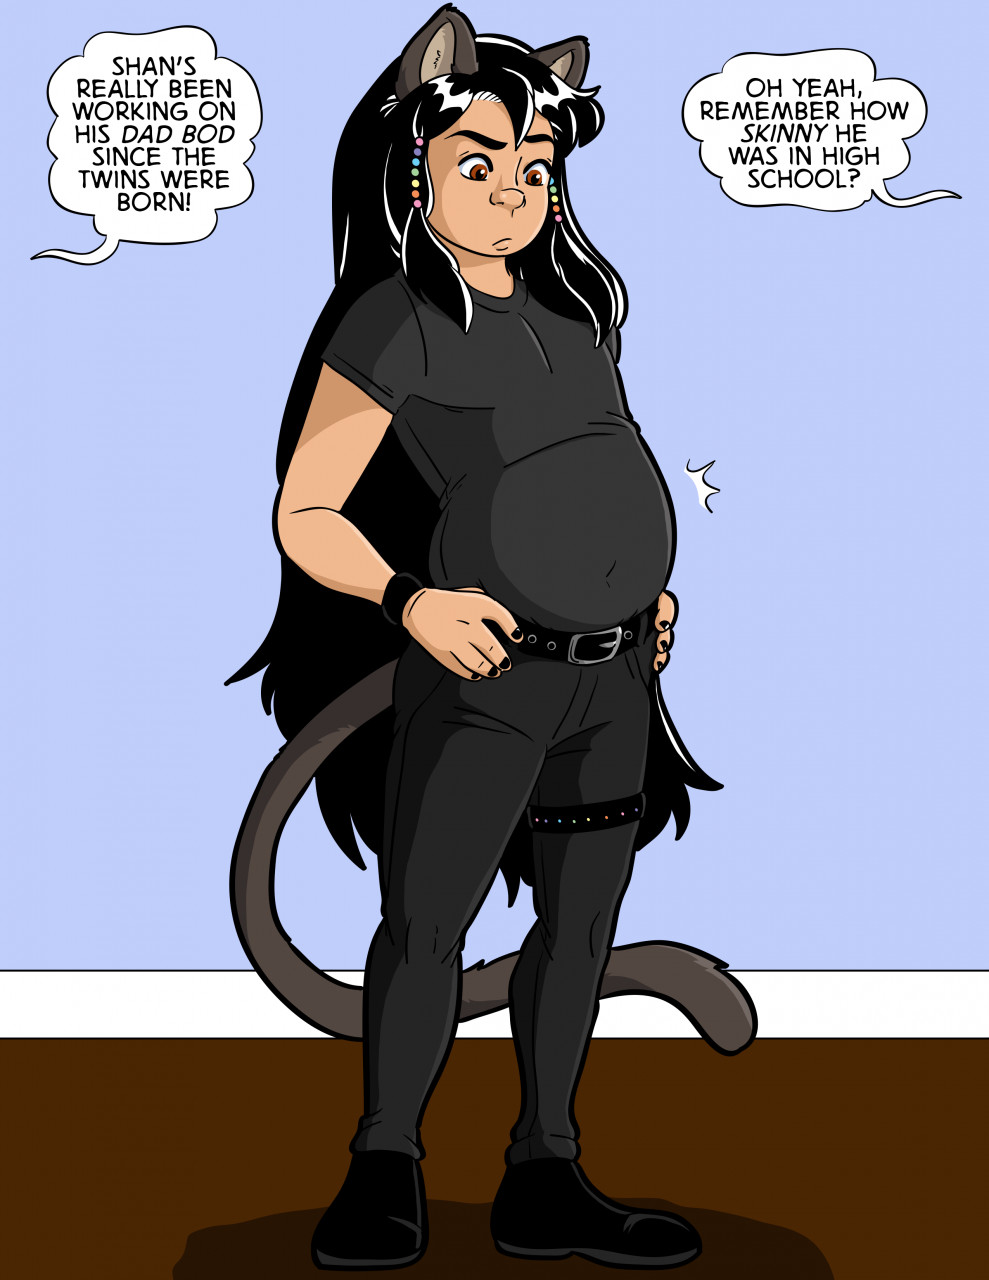 catwoman weight gain comic